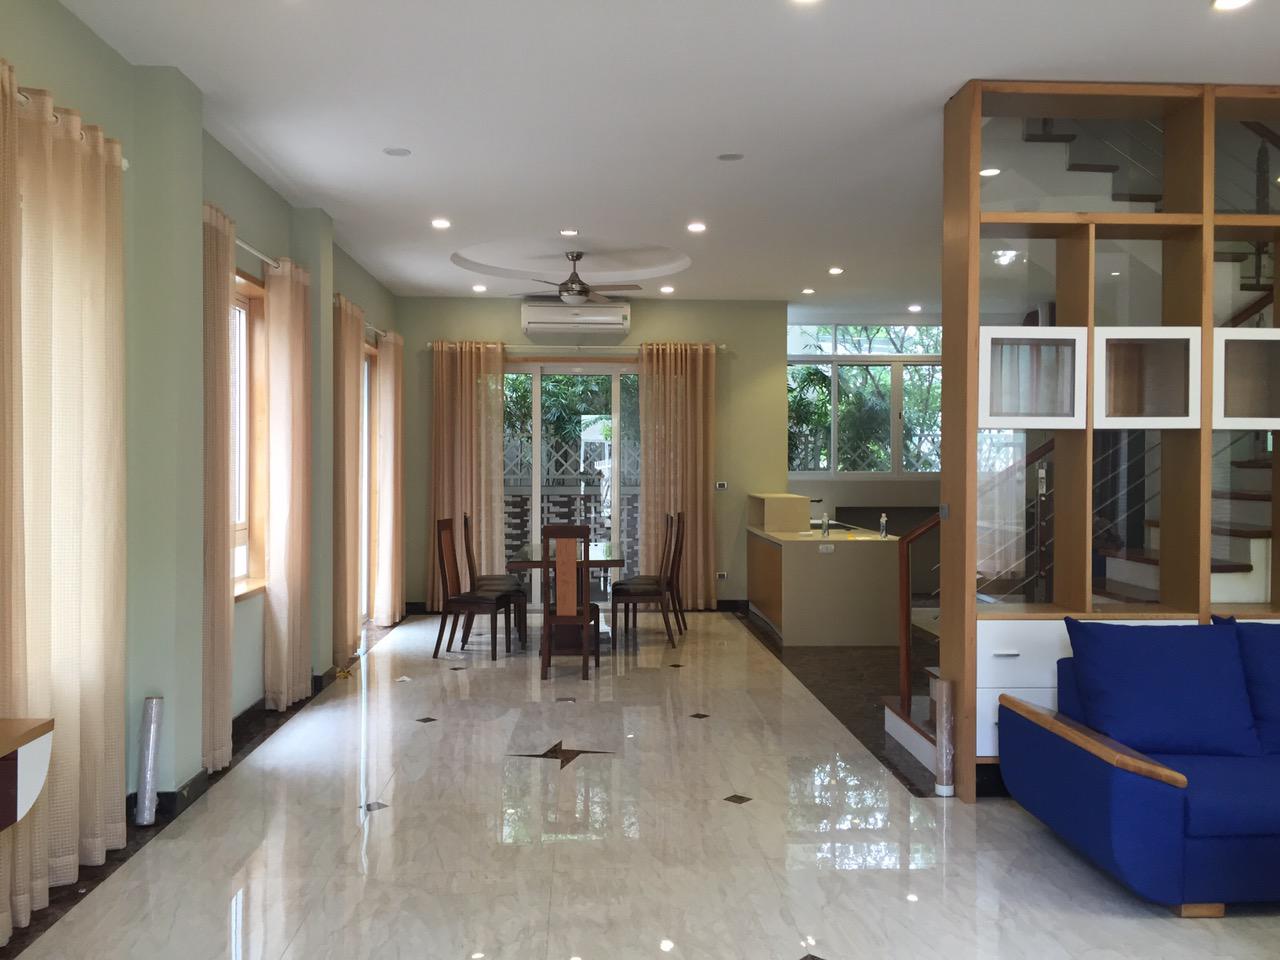 A brand new beautiful 4 bedroom villa with river view for rent in Vinhomes Riverside, Long Biên